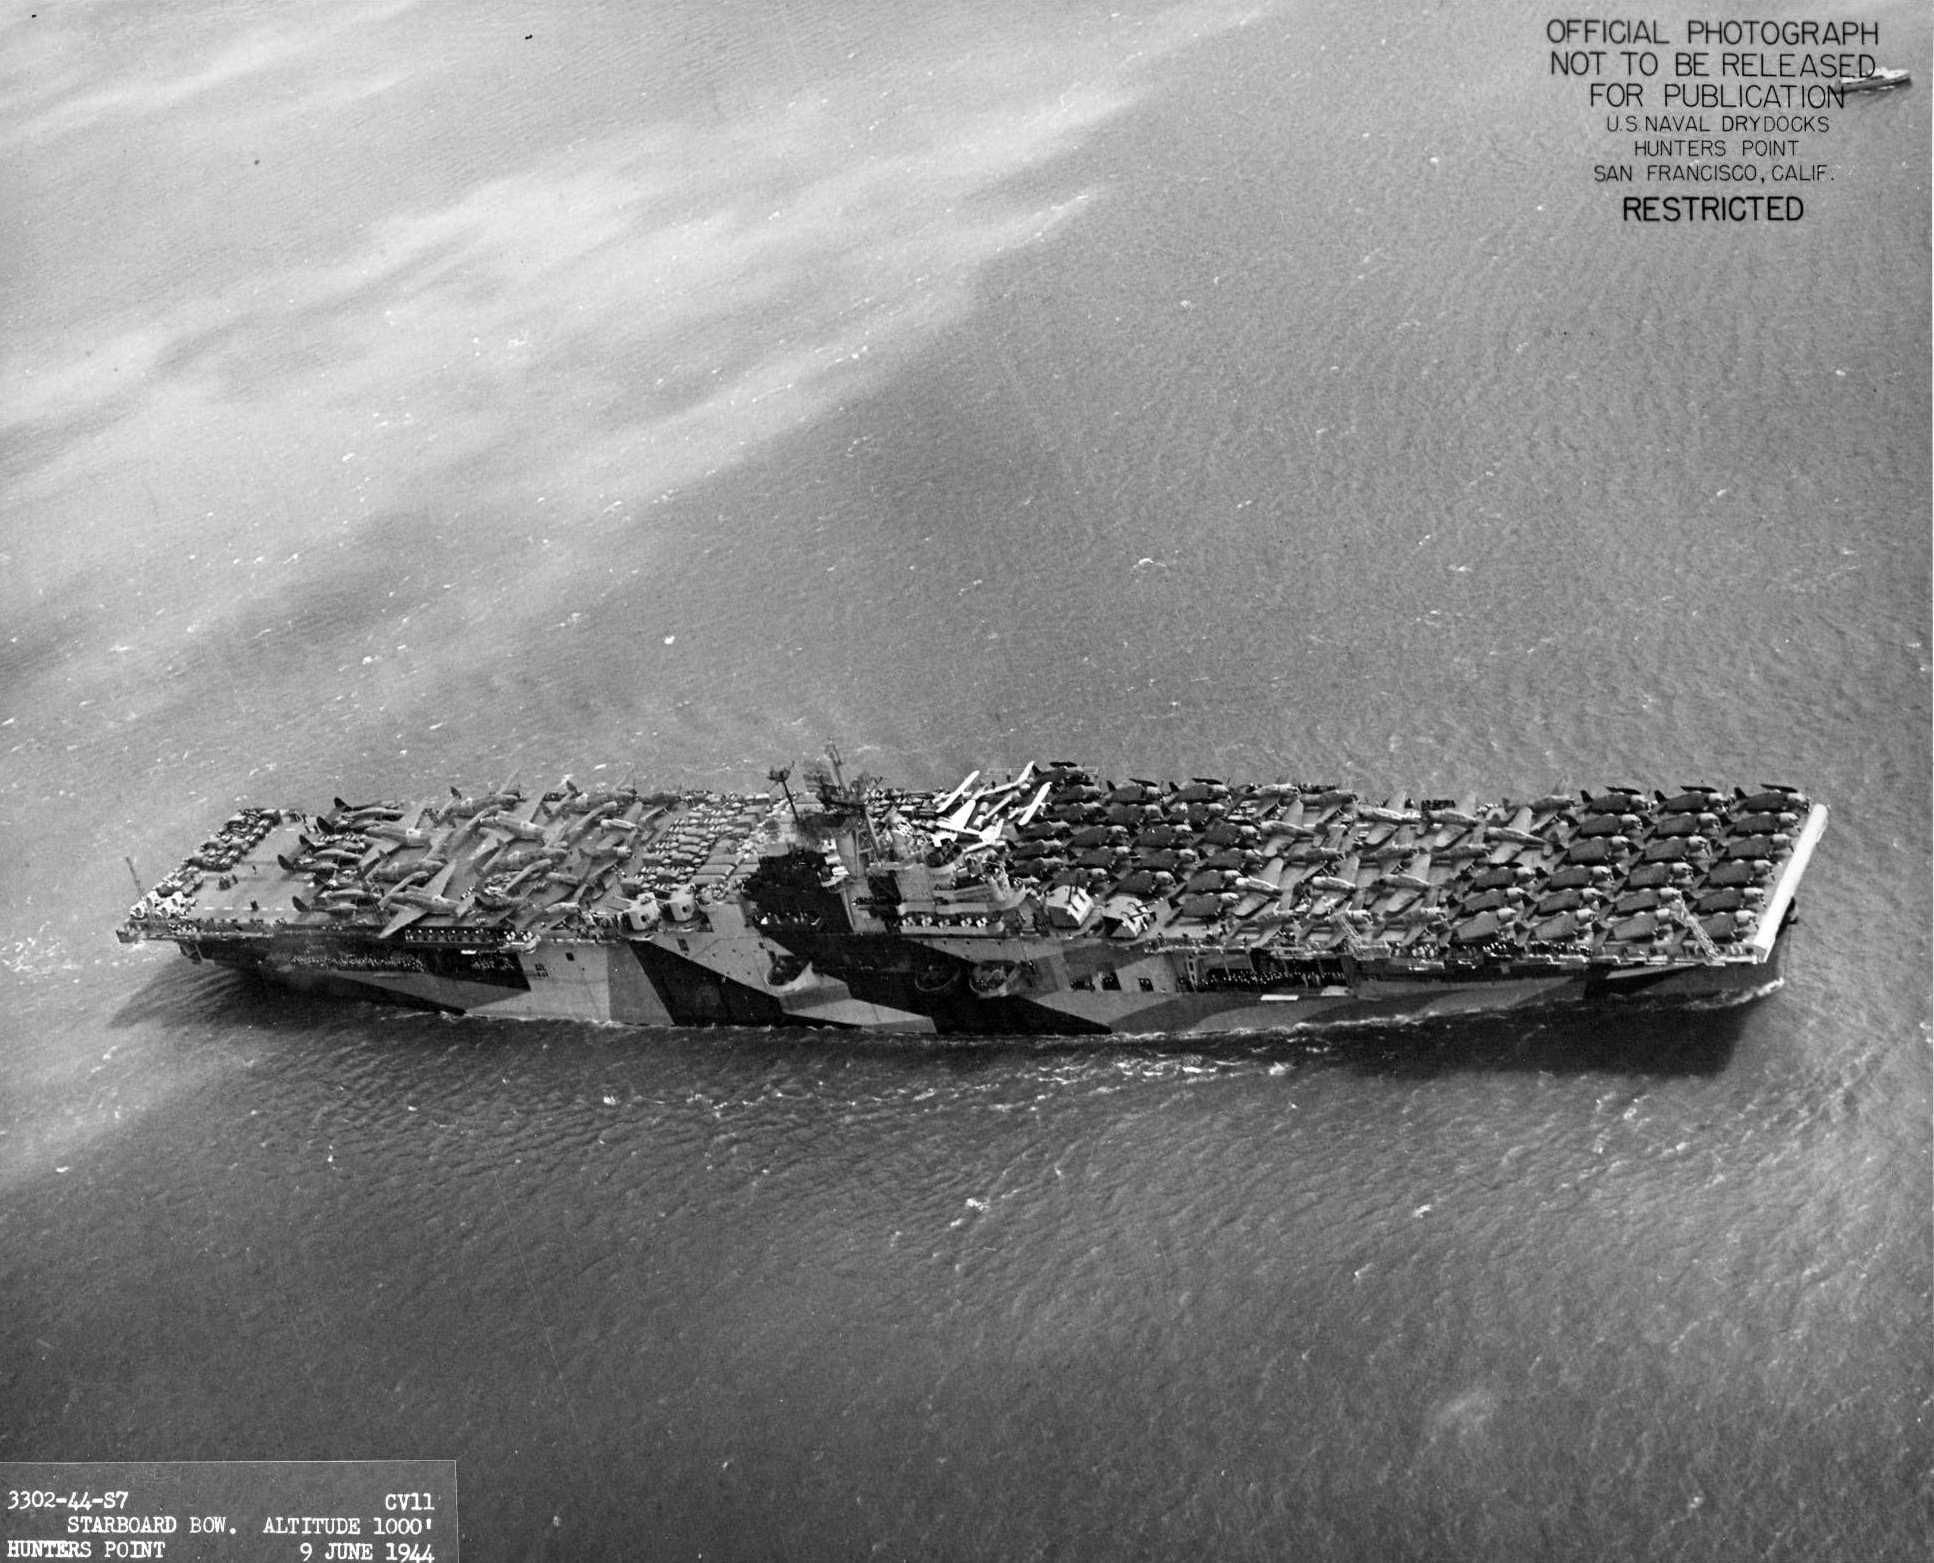 USS Intrepid departing San Francisco, California, 9 Jun 1944 packed with vehicles, equipment, and aircraft including SBD Dauntless, F6F Hellcats, C-45 Expeditors, PV-1 Venturas, and P-61 Black Widows. Photo 1 of 3